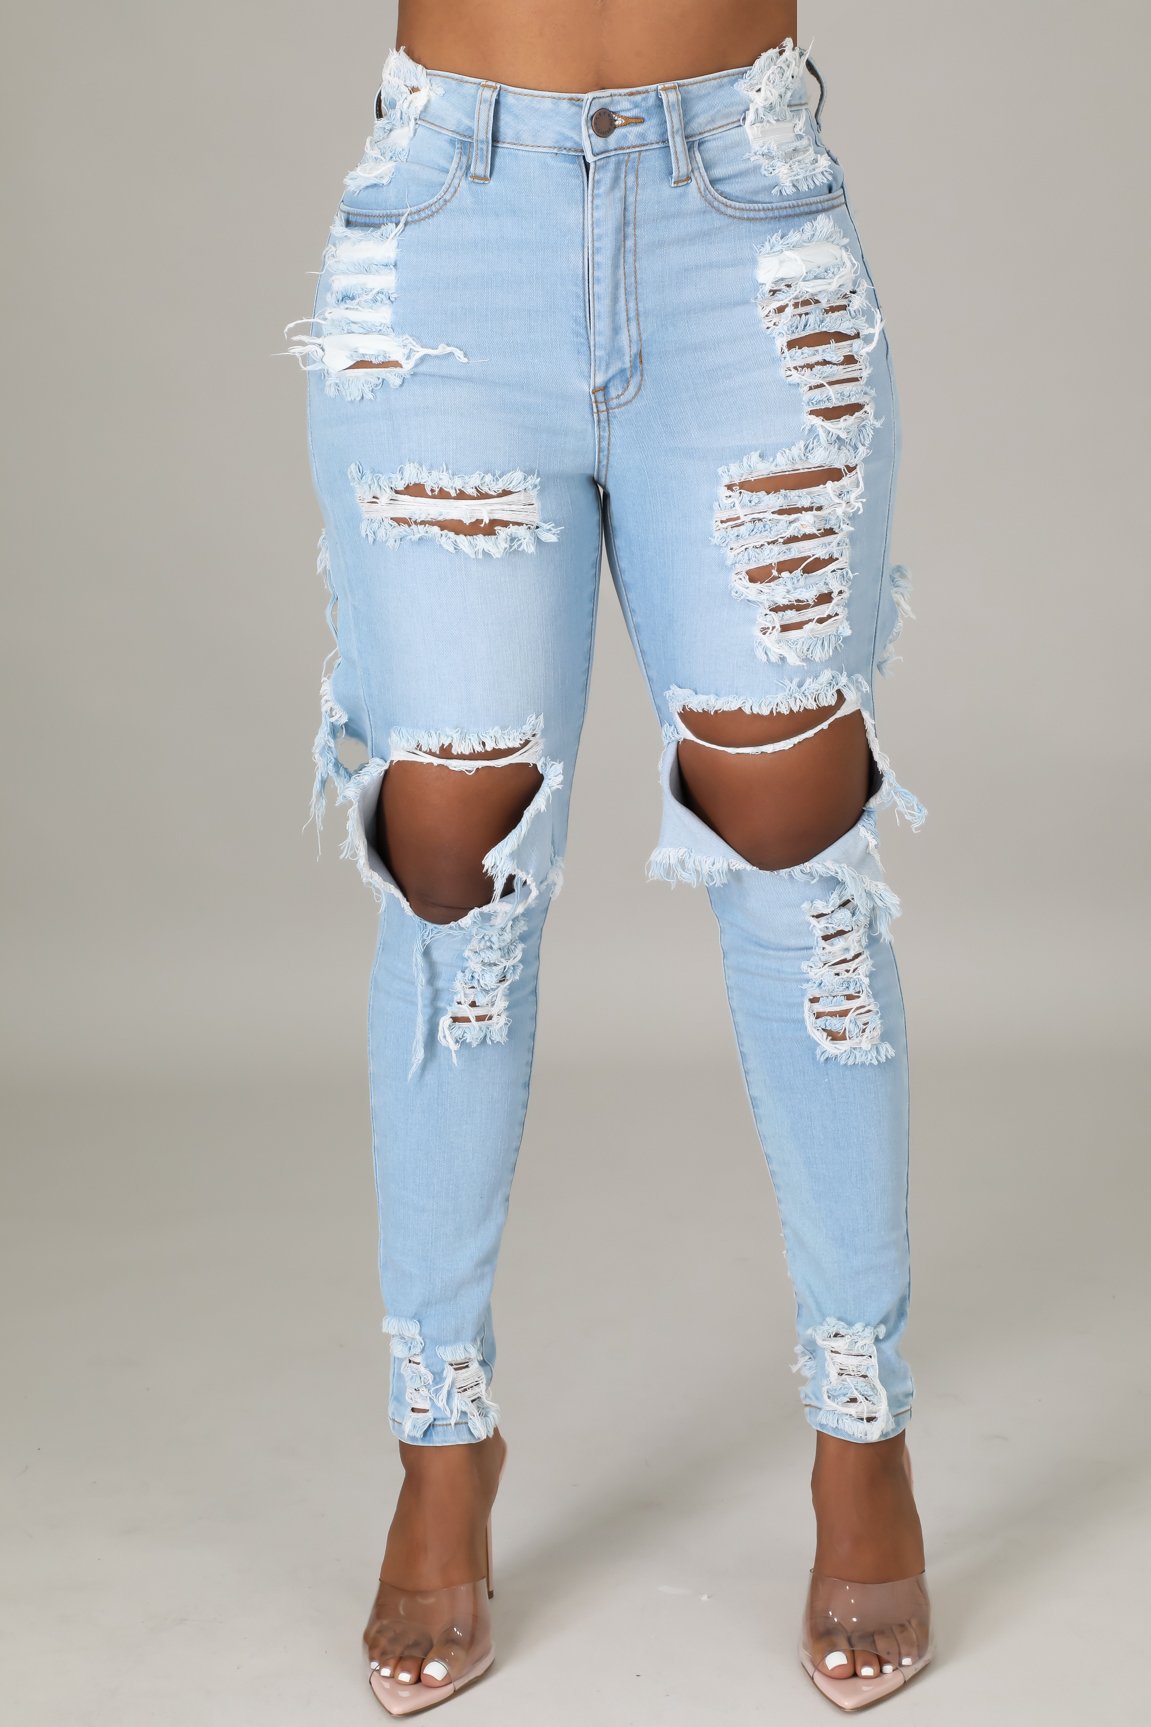 SP Blue Little Feet Jeans Women Street Style Sexy Mid Rise Distressed Stretch Skinny Hole Denim Pants